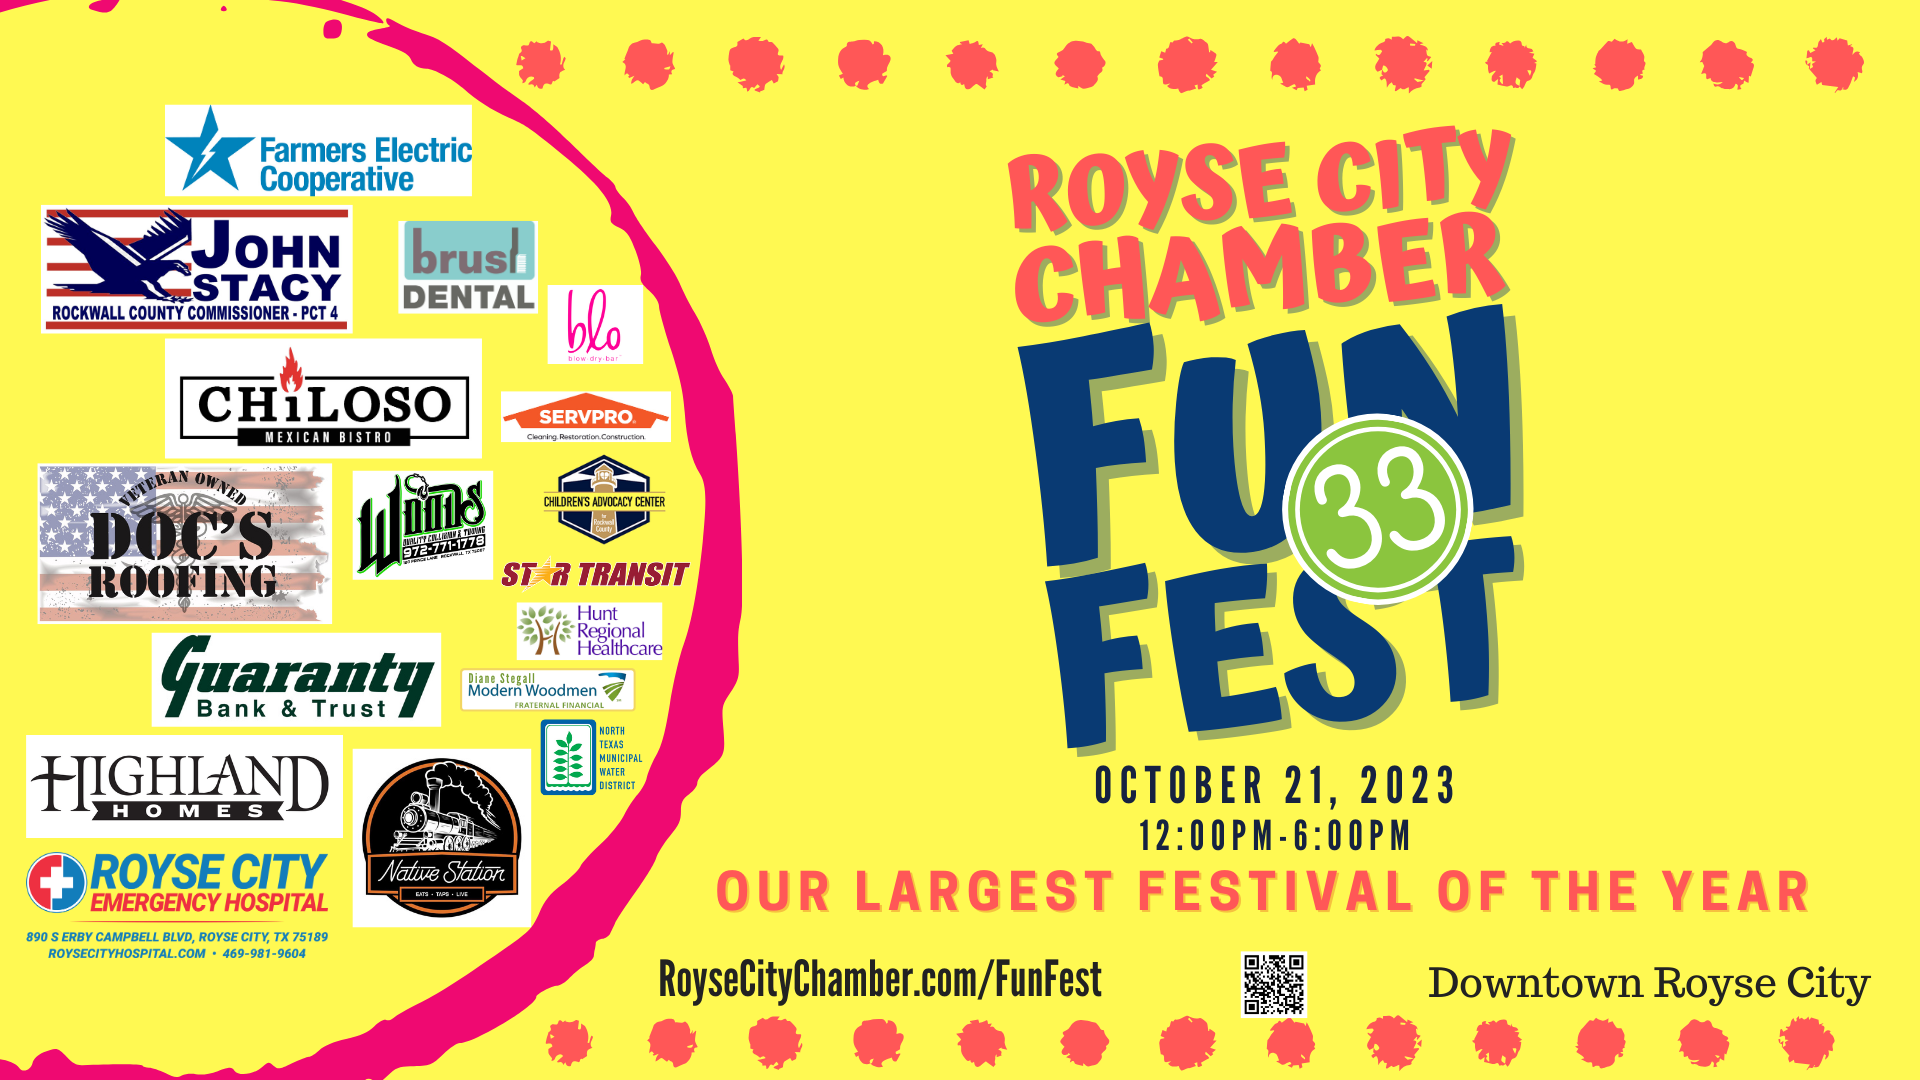 Annual Royse City Fun Fest to be held October 21